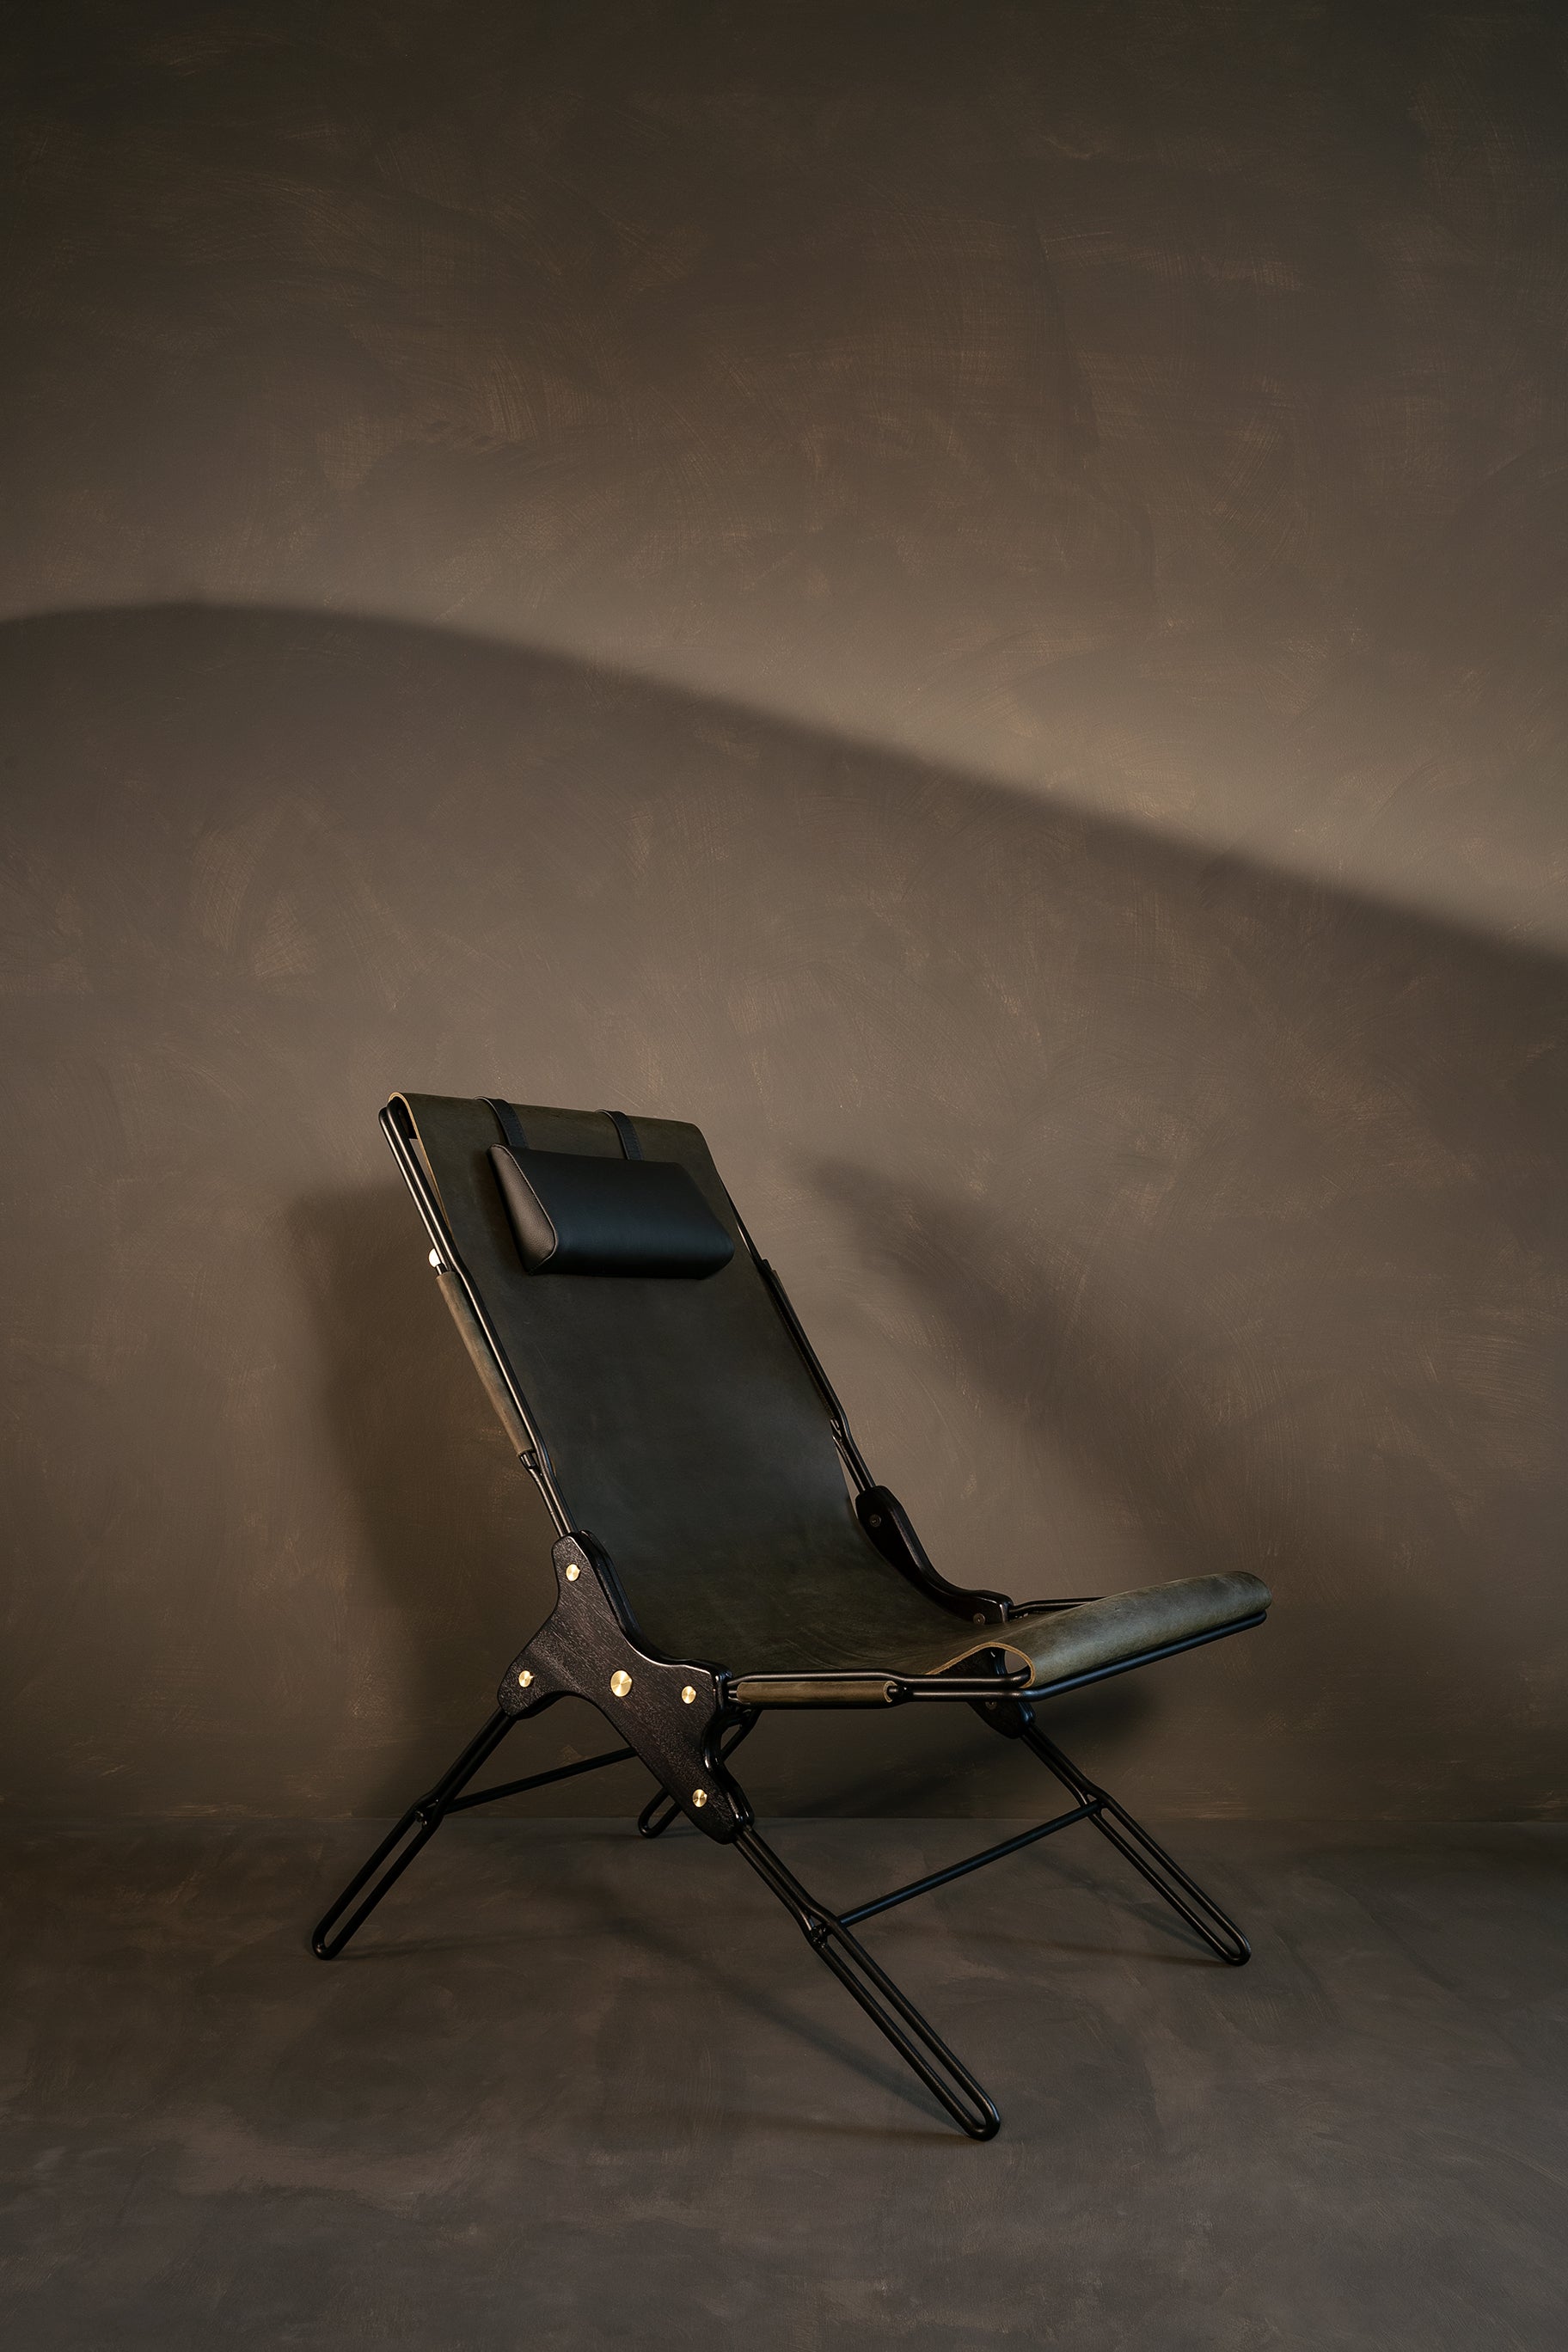 Olivo lounge chair by Estudio Andean. 
Dimensions: W 56 x D 83 x H 93 cm
Materials: steel, bronze, wood, leather.

Lounge chair made of steel rod structure and solid colorado wood with a natural oil finish, Ecuadorian sustainable cowhide leather